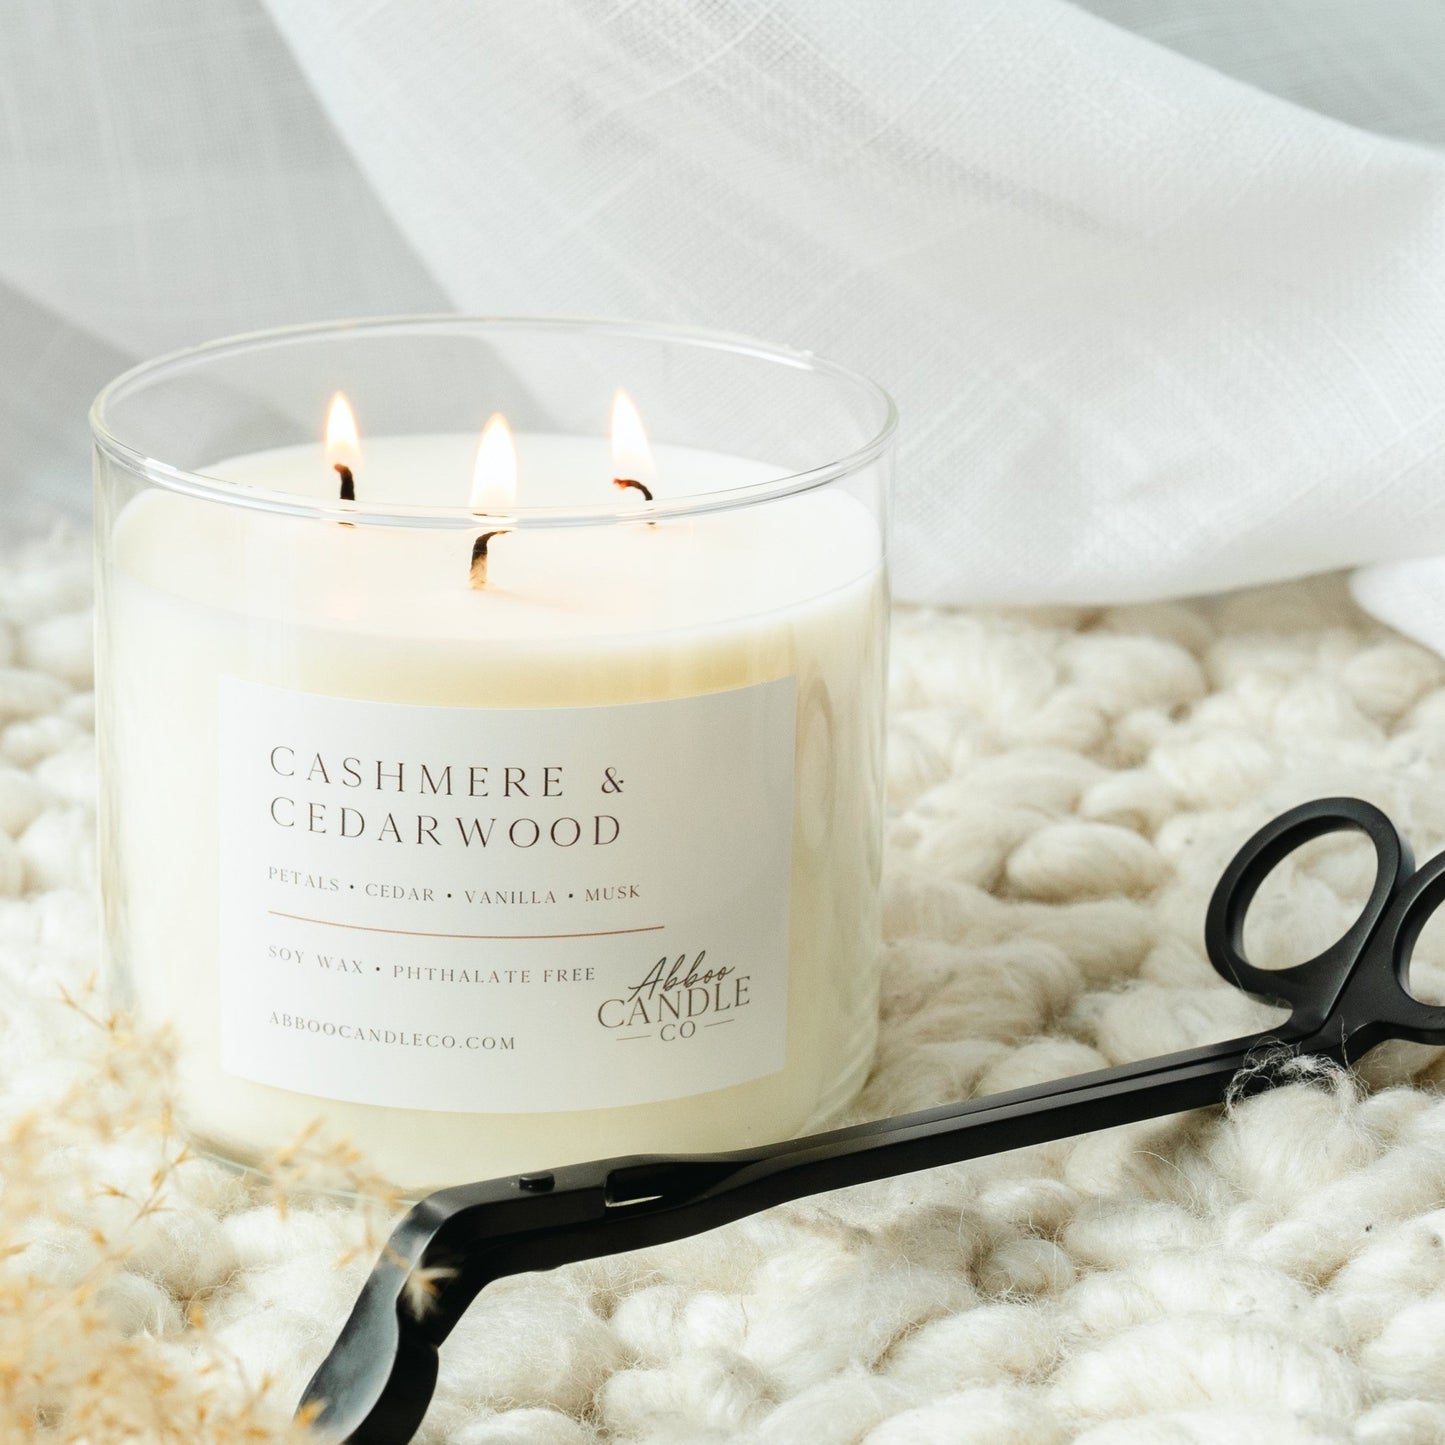 Cashmere and Cedarwood 3-Wick Soy Candle - Abboo Candle Co